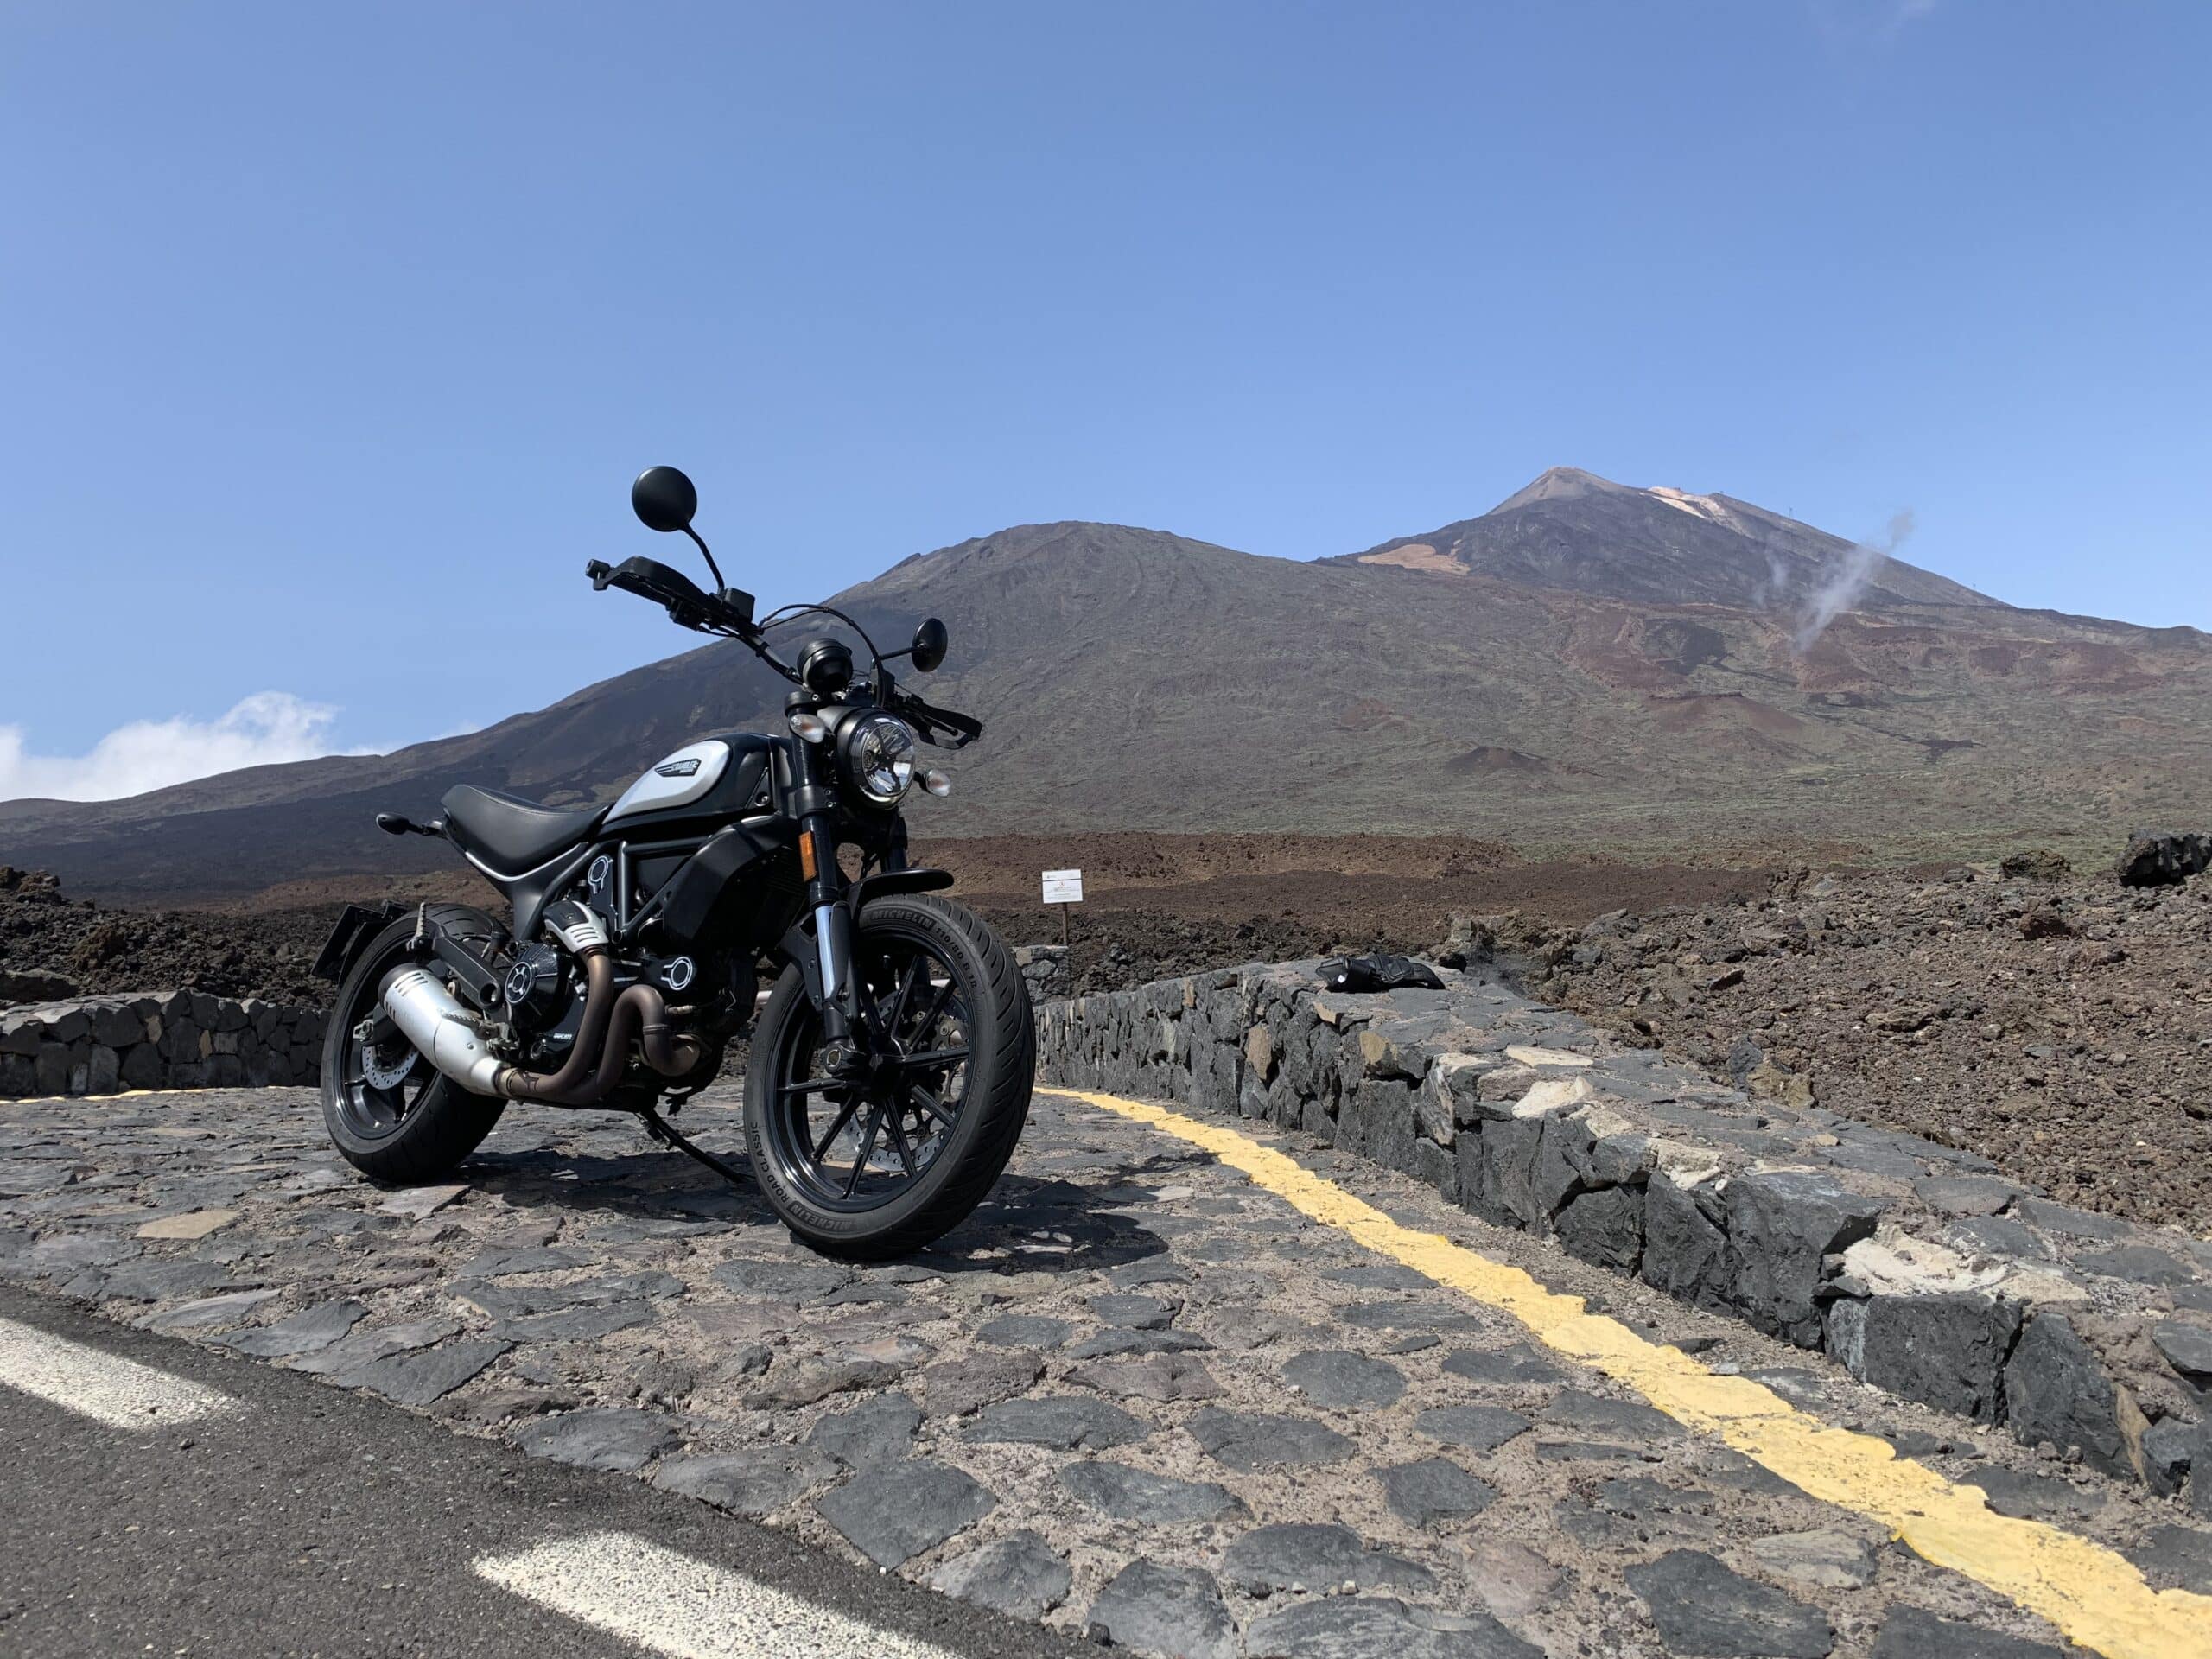 Don’t get a fine – how to properly park your motorcycle on the Canary Islands